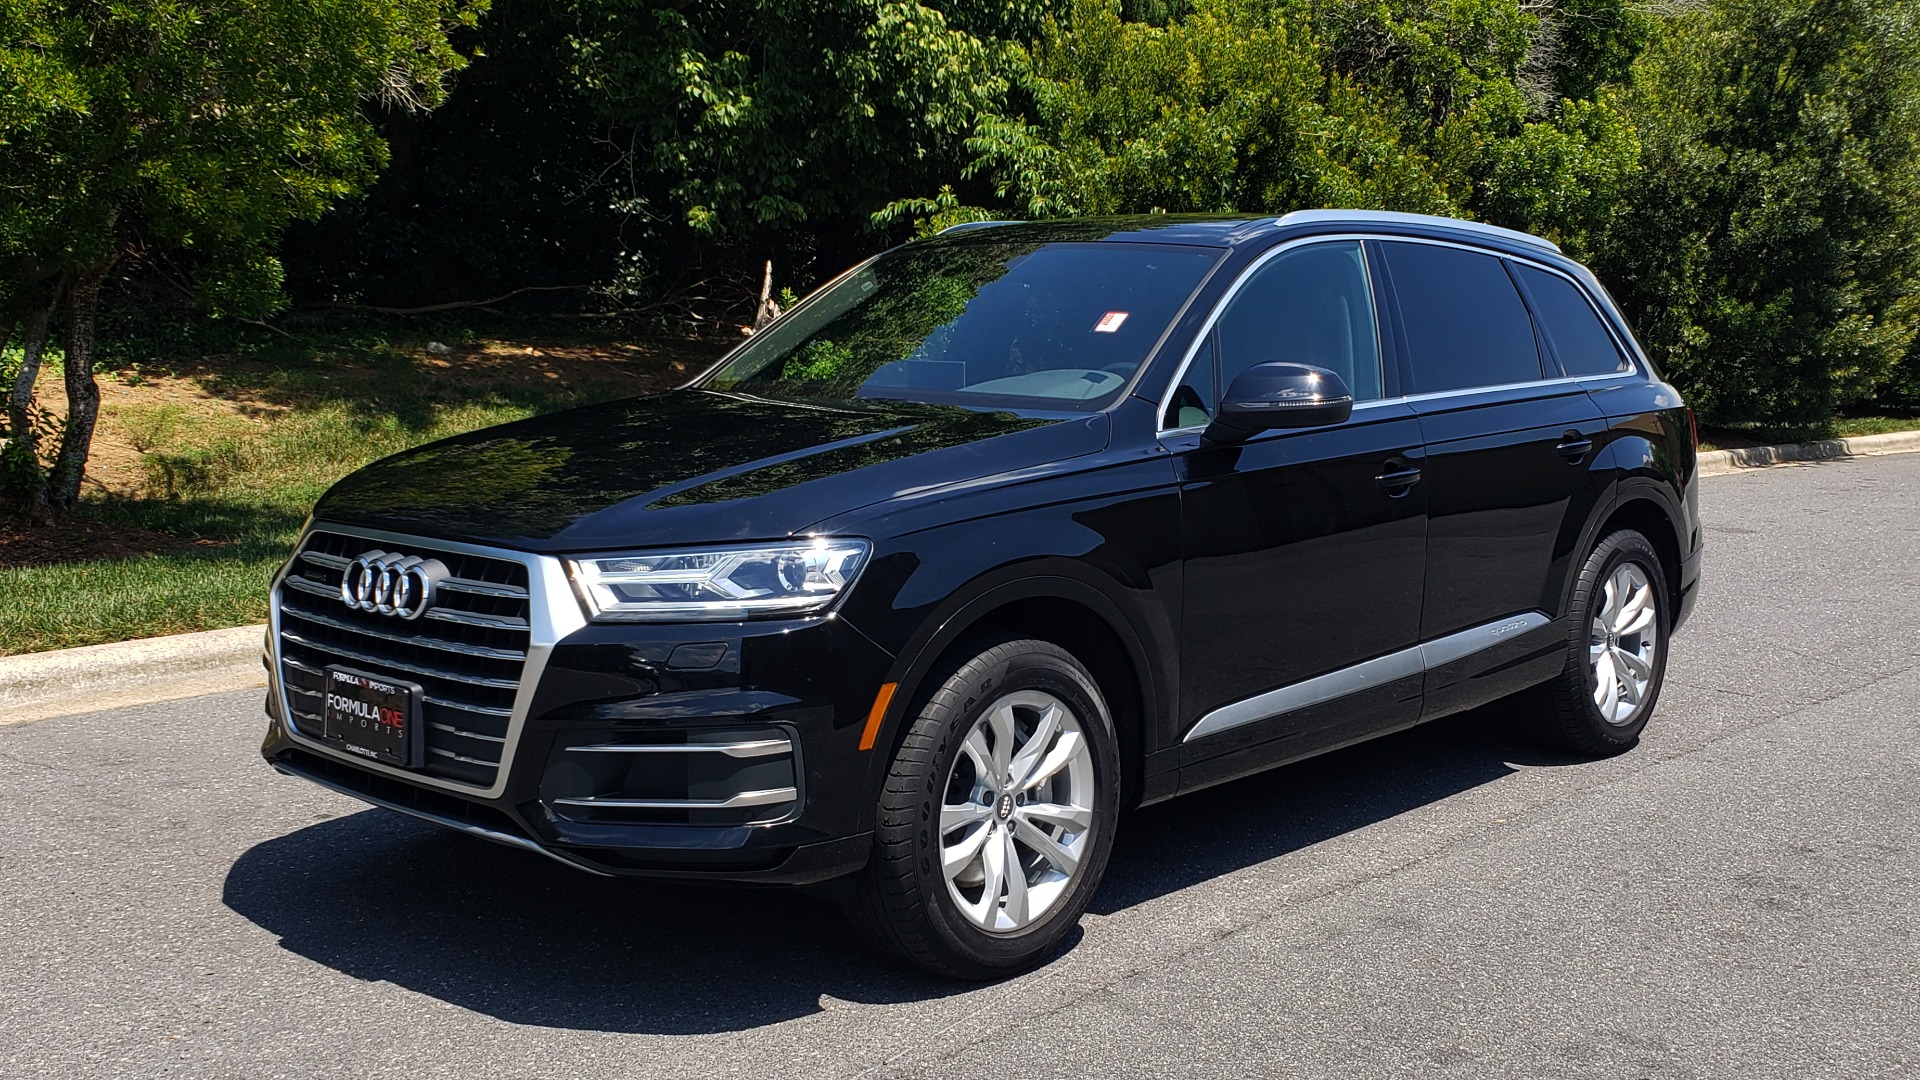 Used 2017 Audi Q7 PREMIUM PLUS / NAV / HTD STS / SUNROOF / REARVIEW / 3-ROW for sale Sold at Formula Imports in Charlotte NC 28227 1